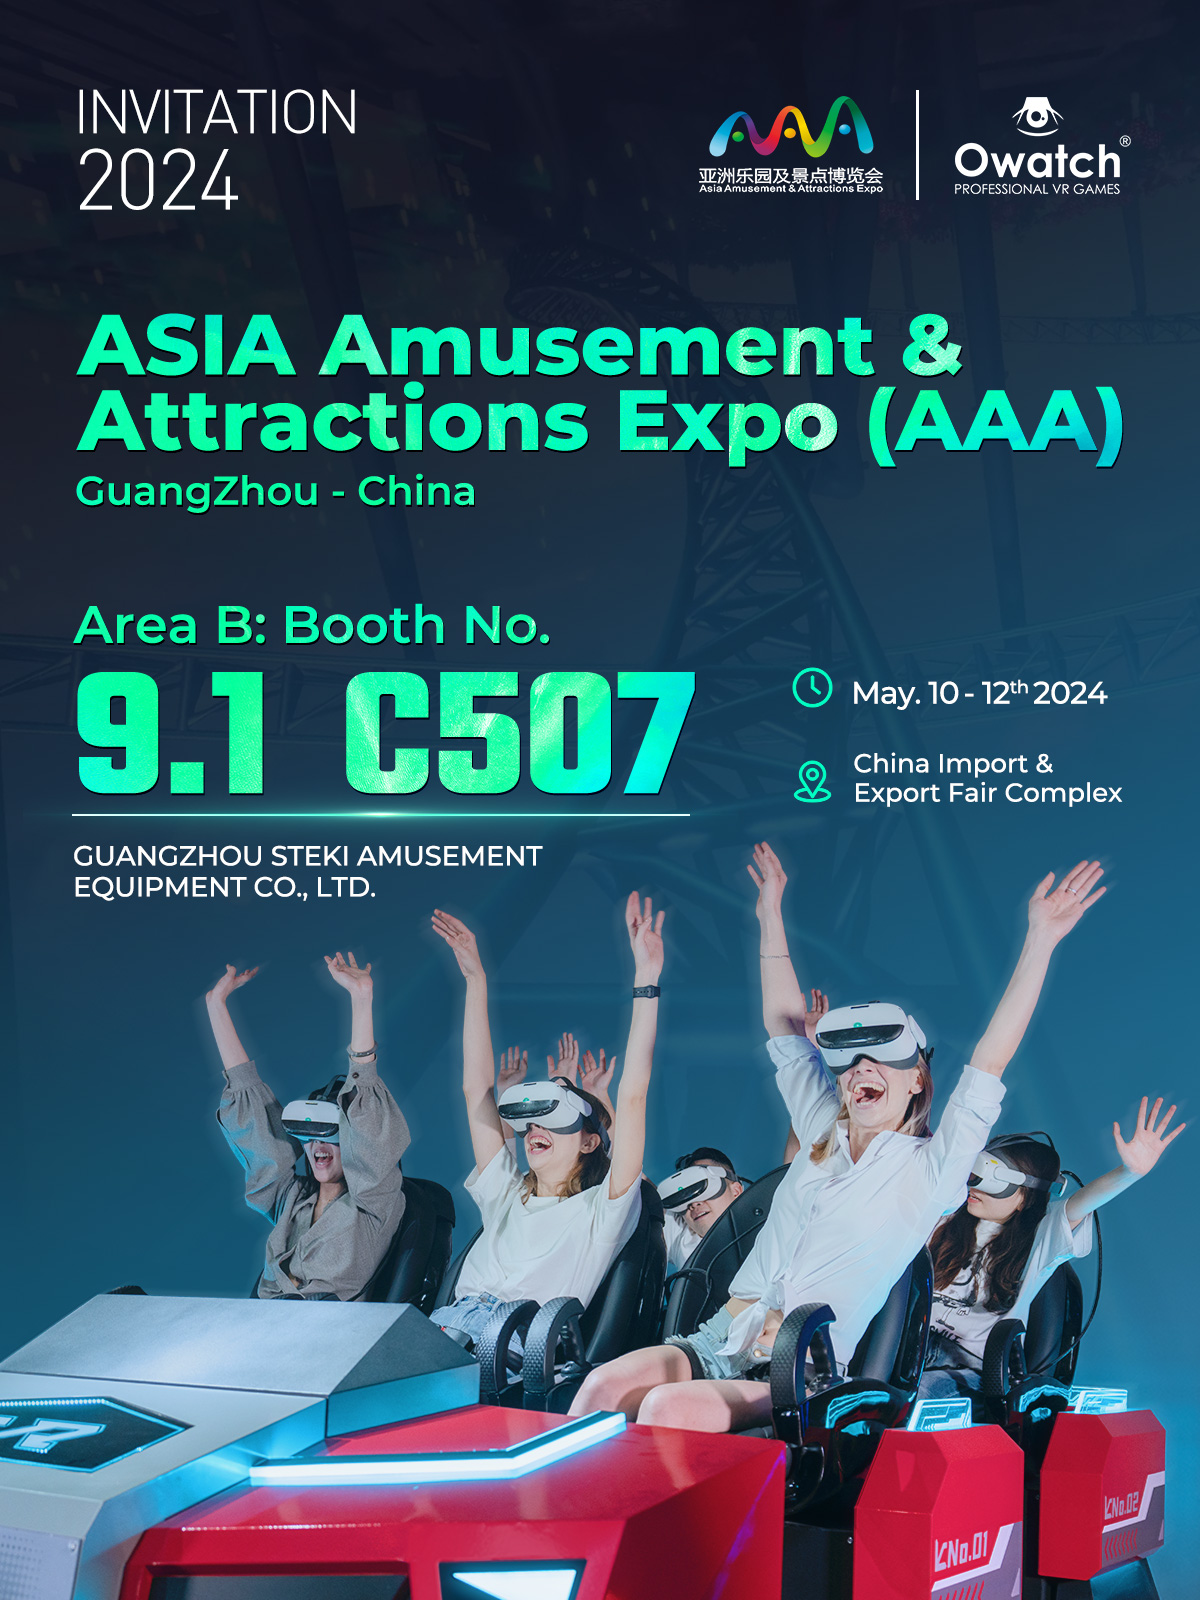 Owatch Looks Forward to Meeting You at AAA